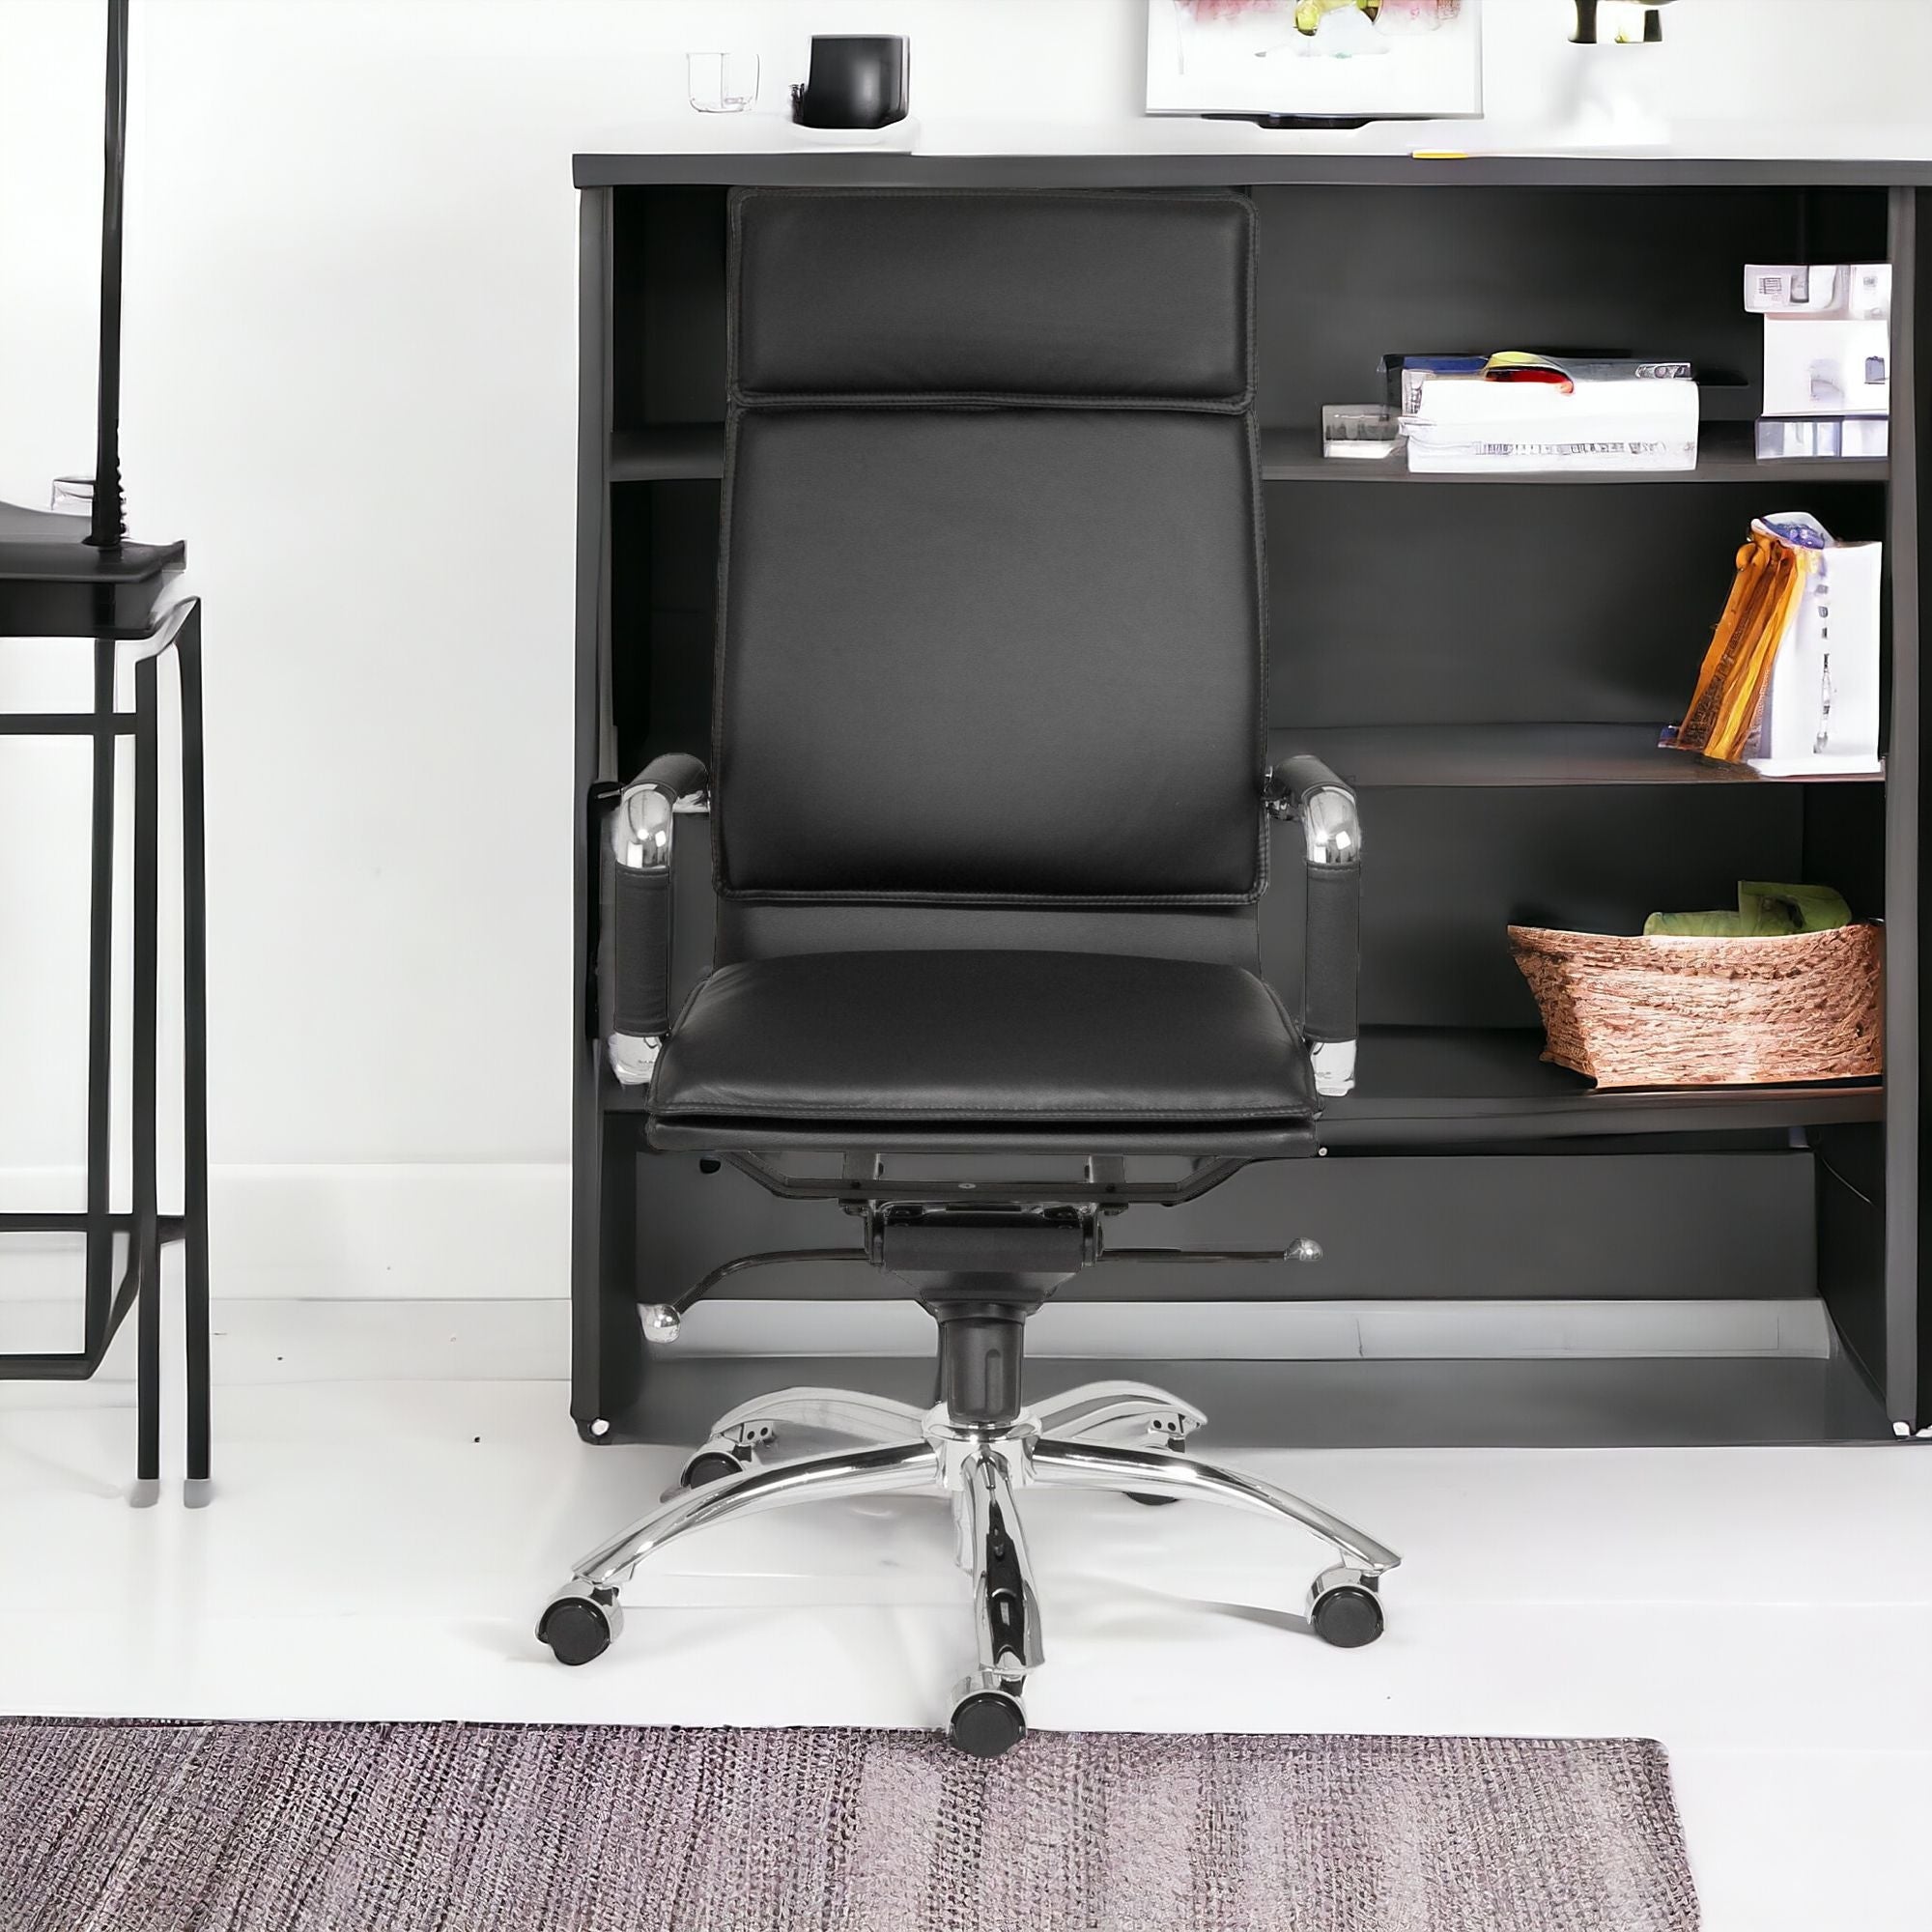 Black and Silver Adjustable Swivel Leather Rolling Office Chair